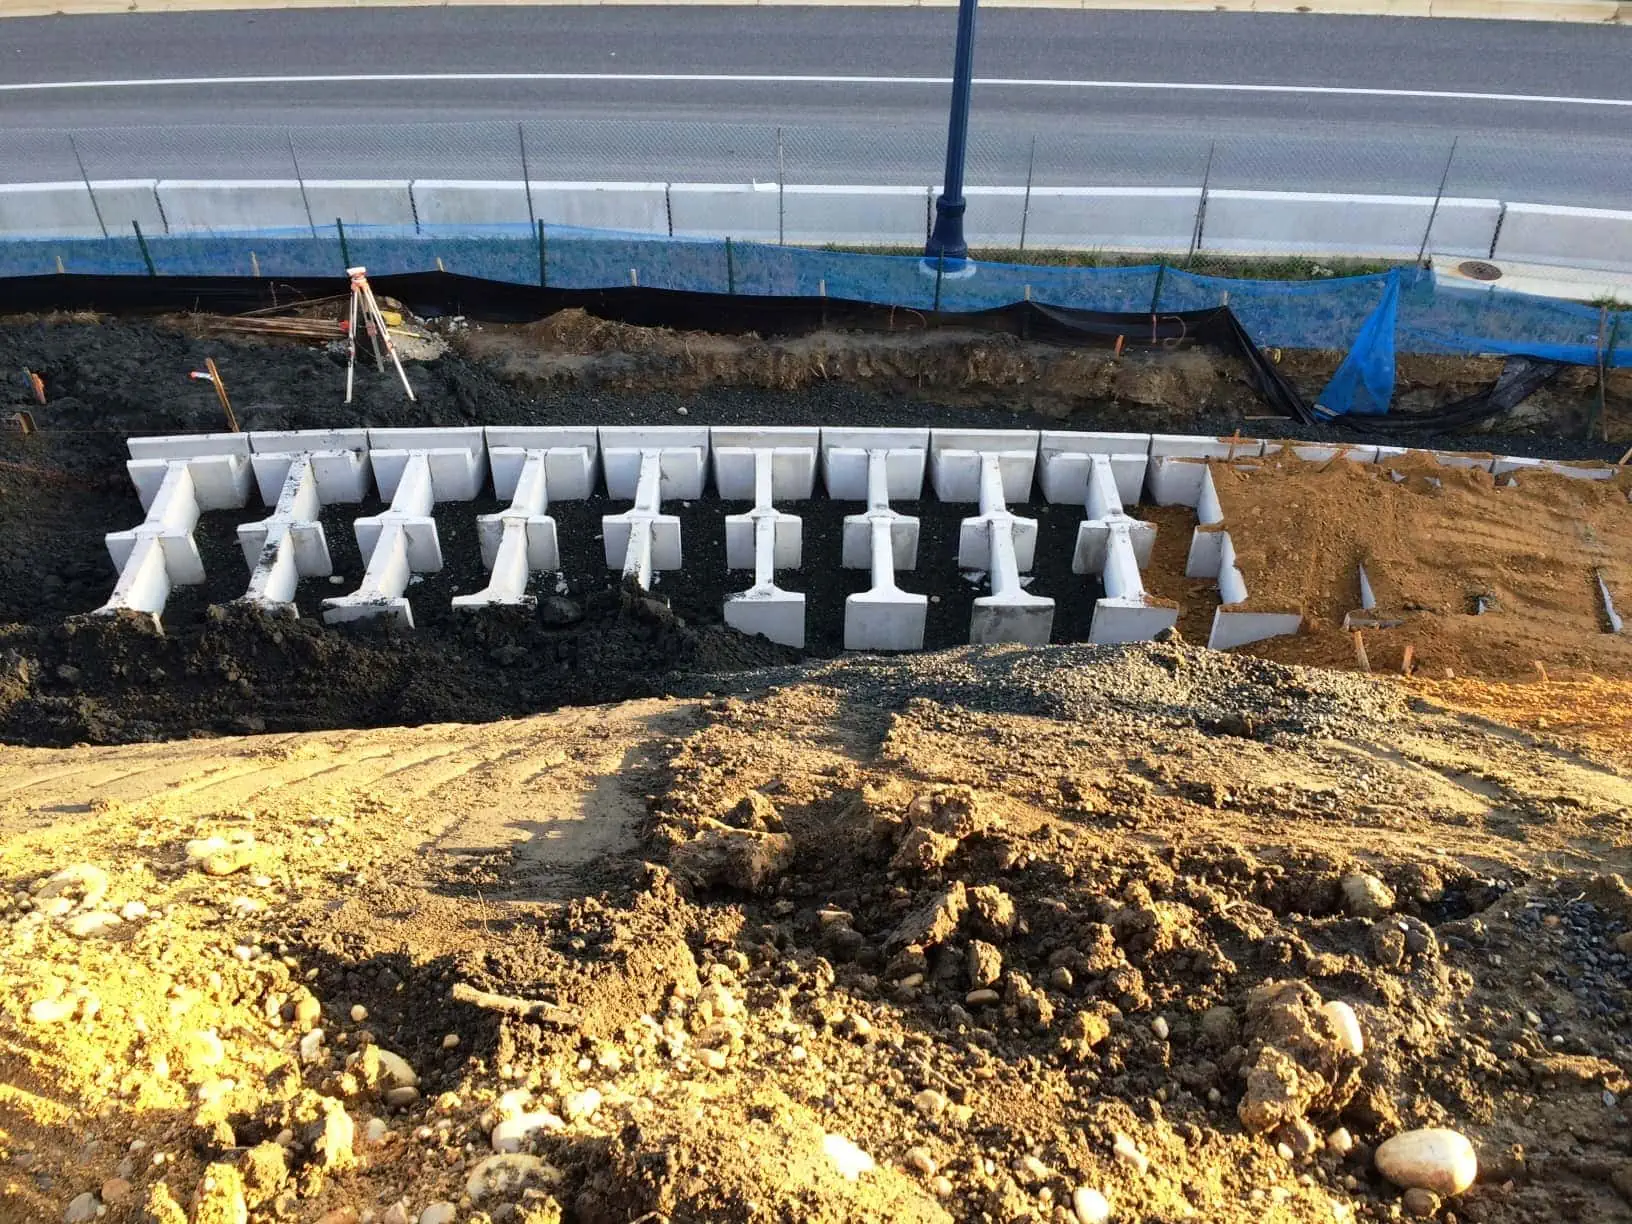 MGM resort uses MagnumStone retaining wall gravity extenders